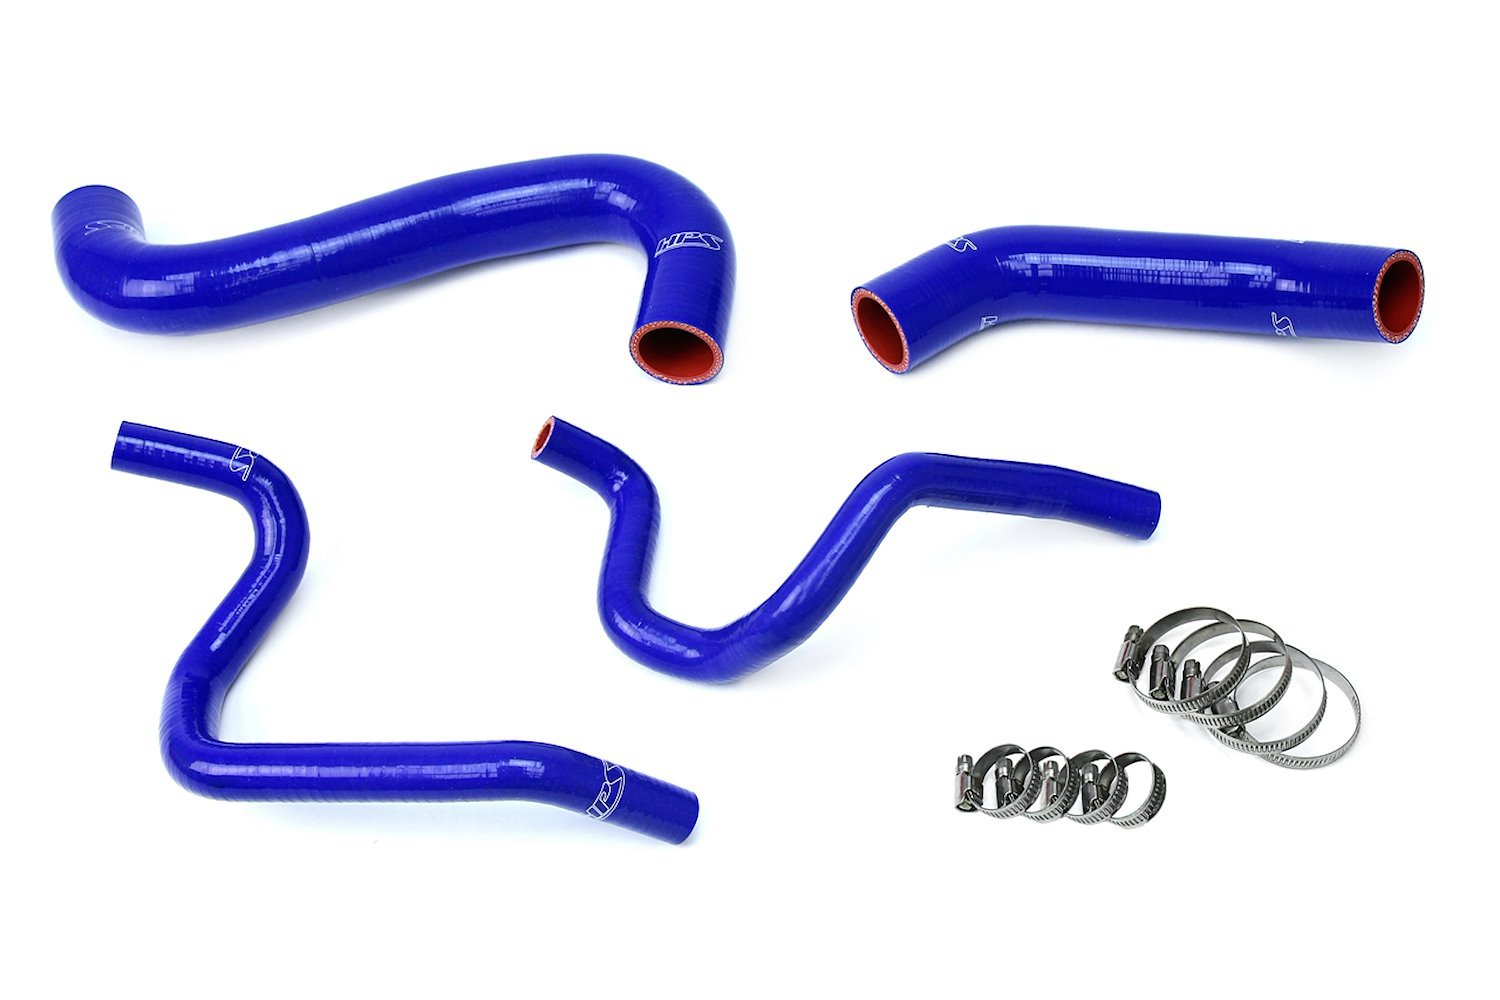 57-1731-BLUE Coolant Hose Kit, High-Temp 3-Ply Reinforced Silicone, Replace Rubber Radiator Heater Coolant Hoses